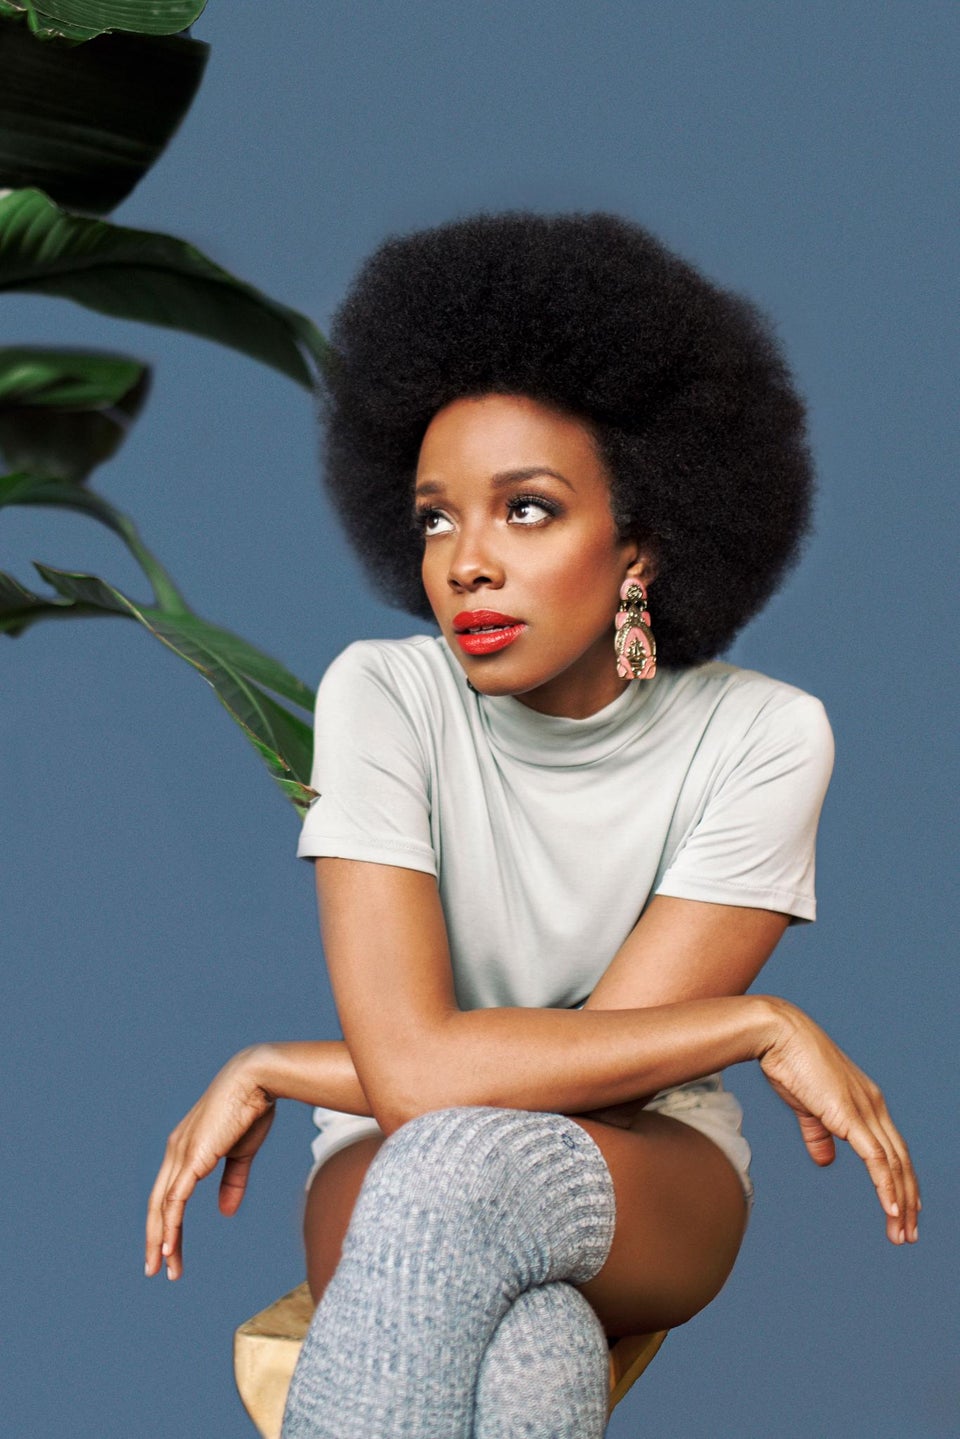 New & Next: Introducing Jamila Woods, a ‘Blk Girl Soldier’ Full of Magic